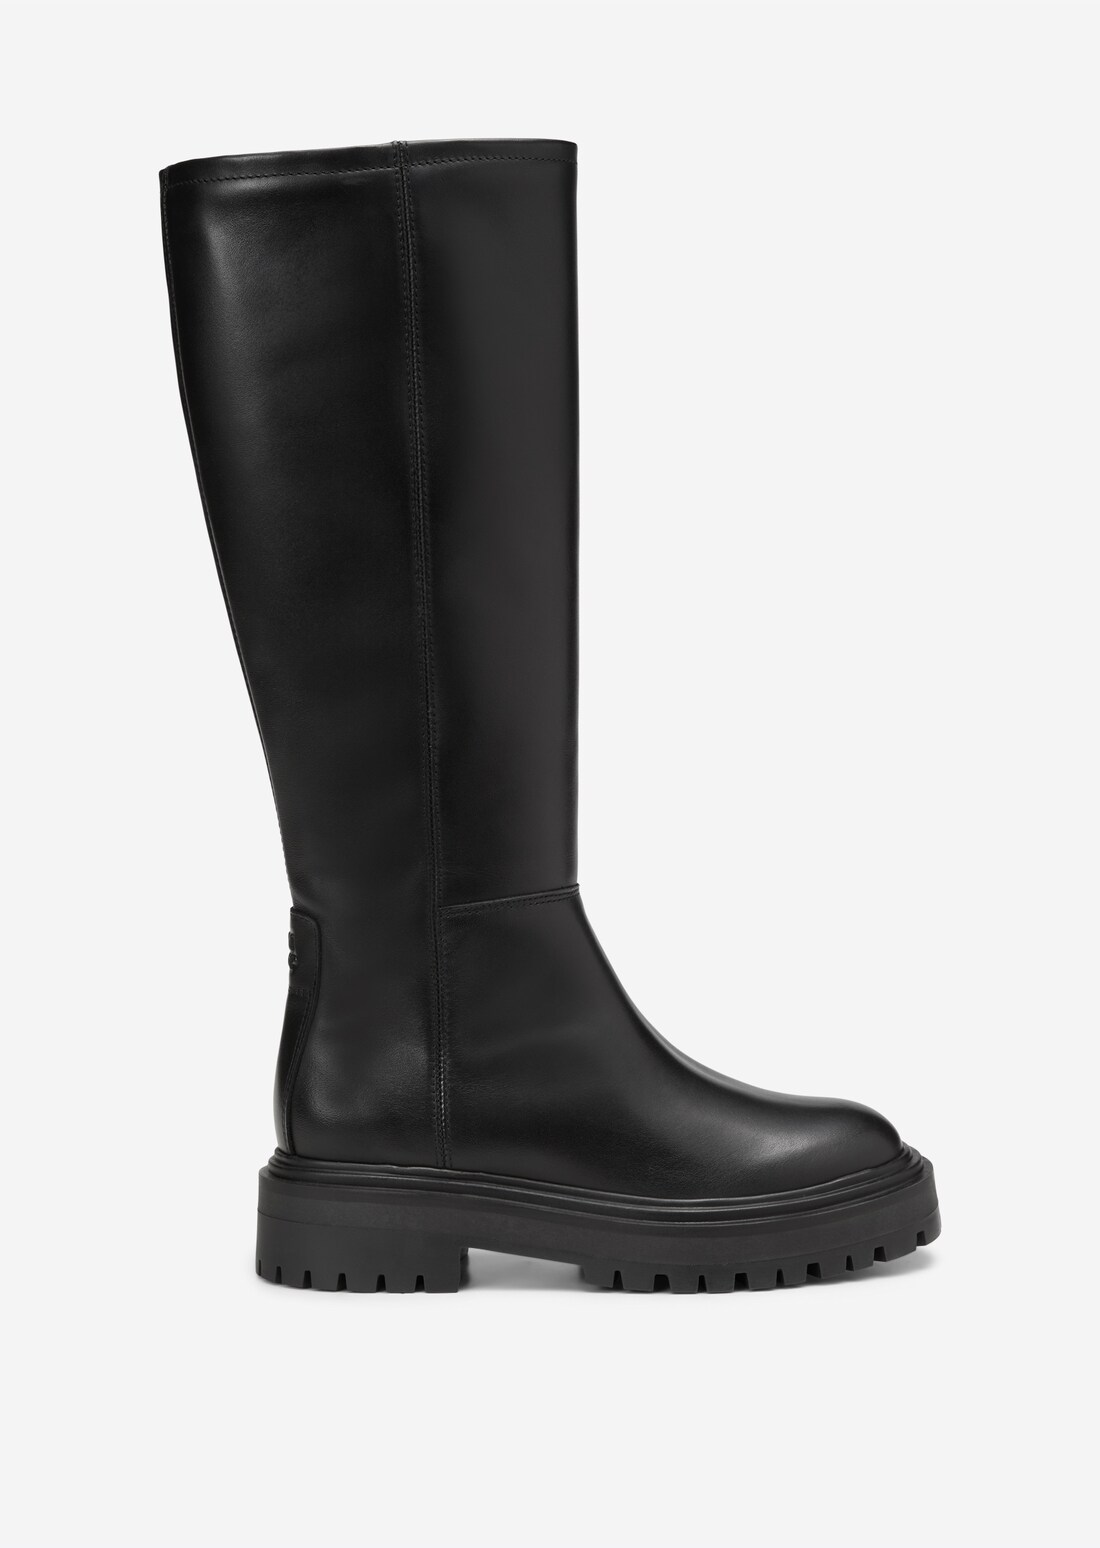 Long shaft boots made from supple calfskin - black | Booties | MARC O’POLO